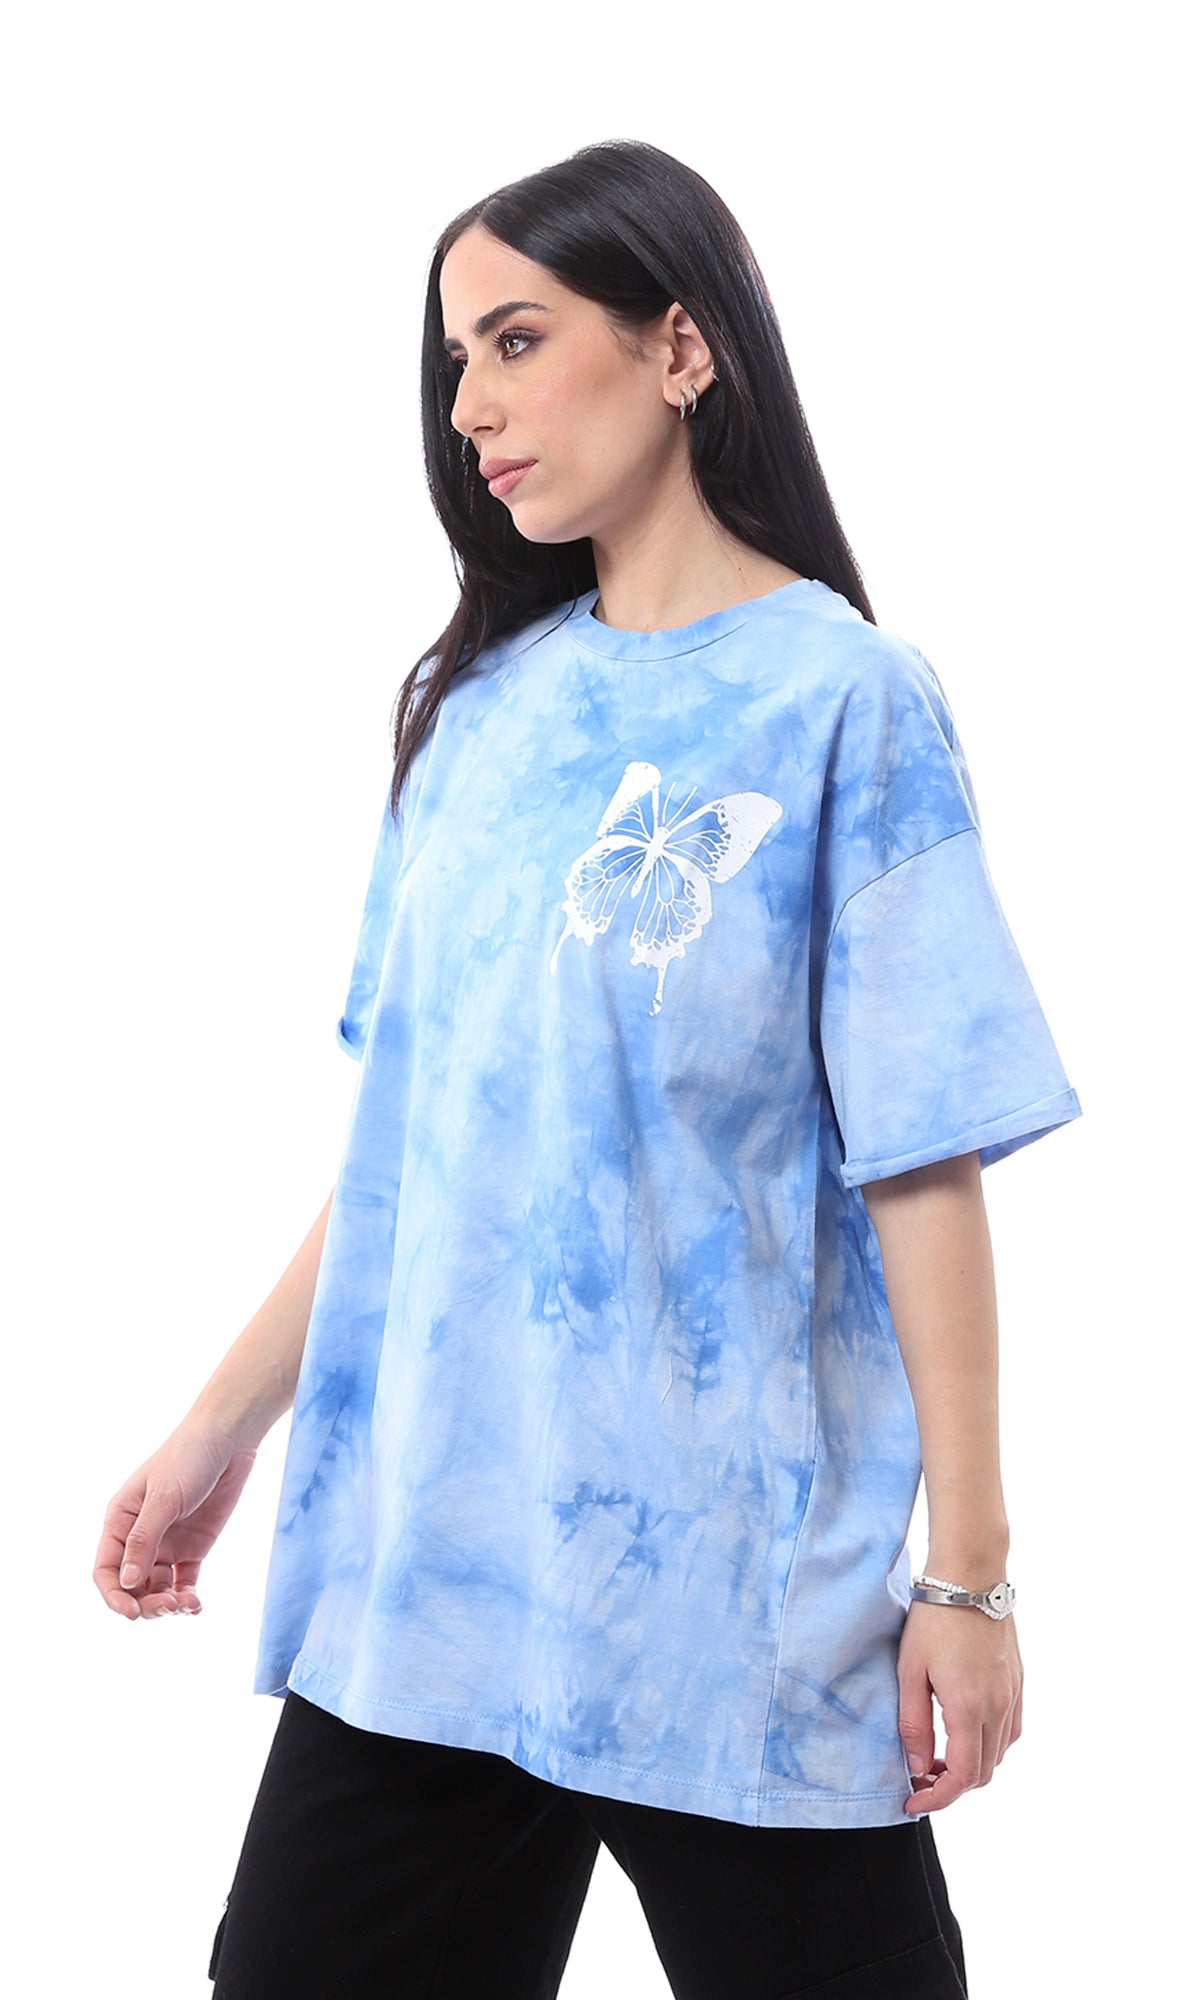 97616 Blue Shades Tie Dye Printed Butterfly Long Tee